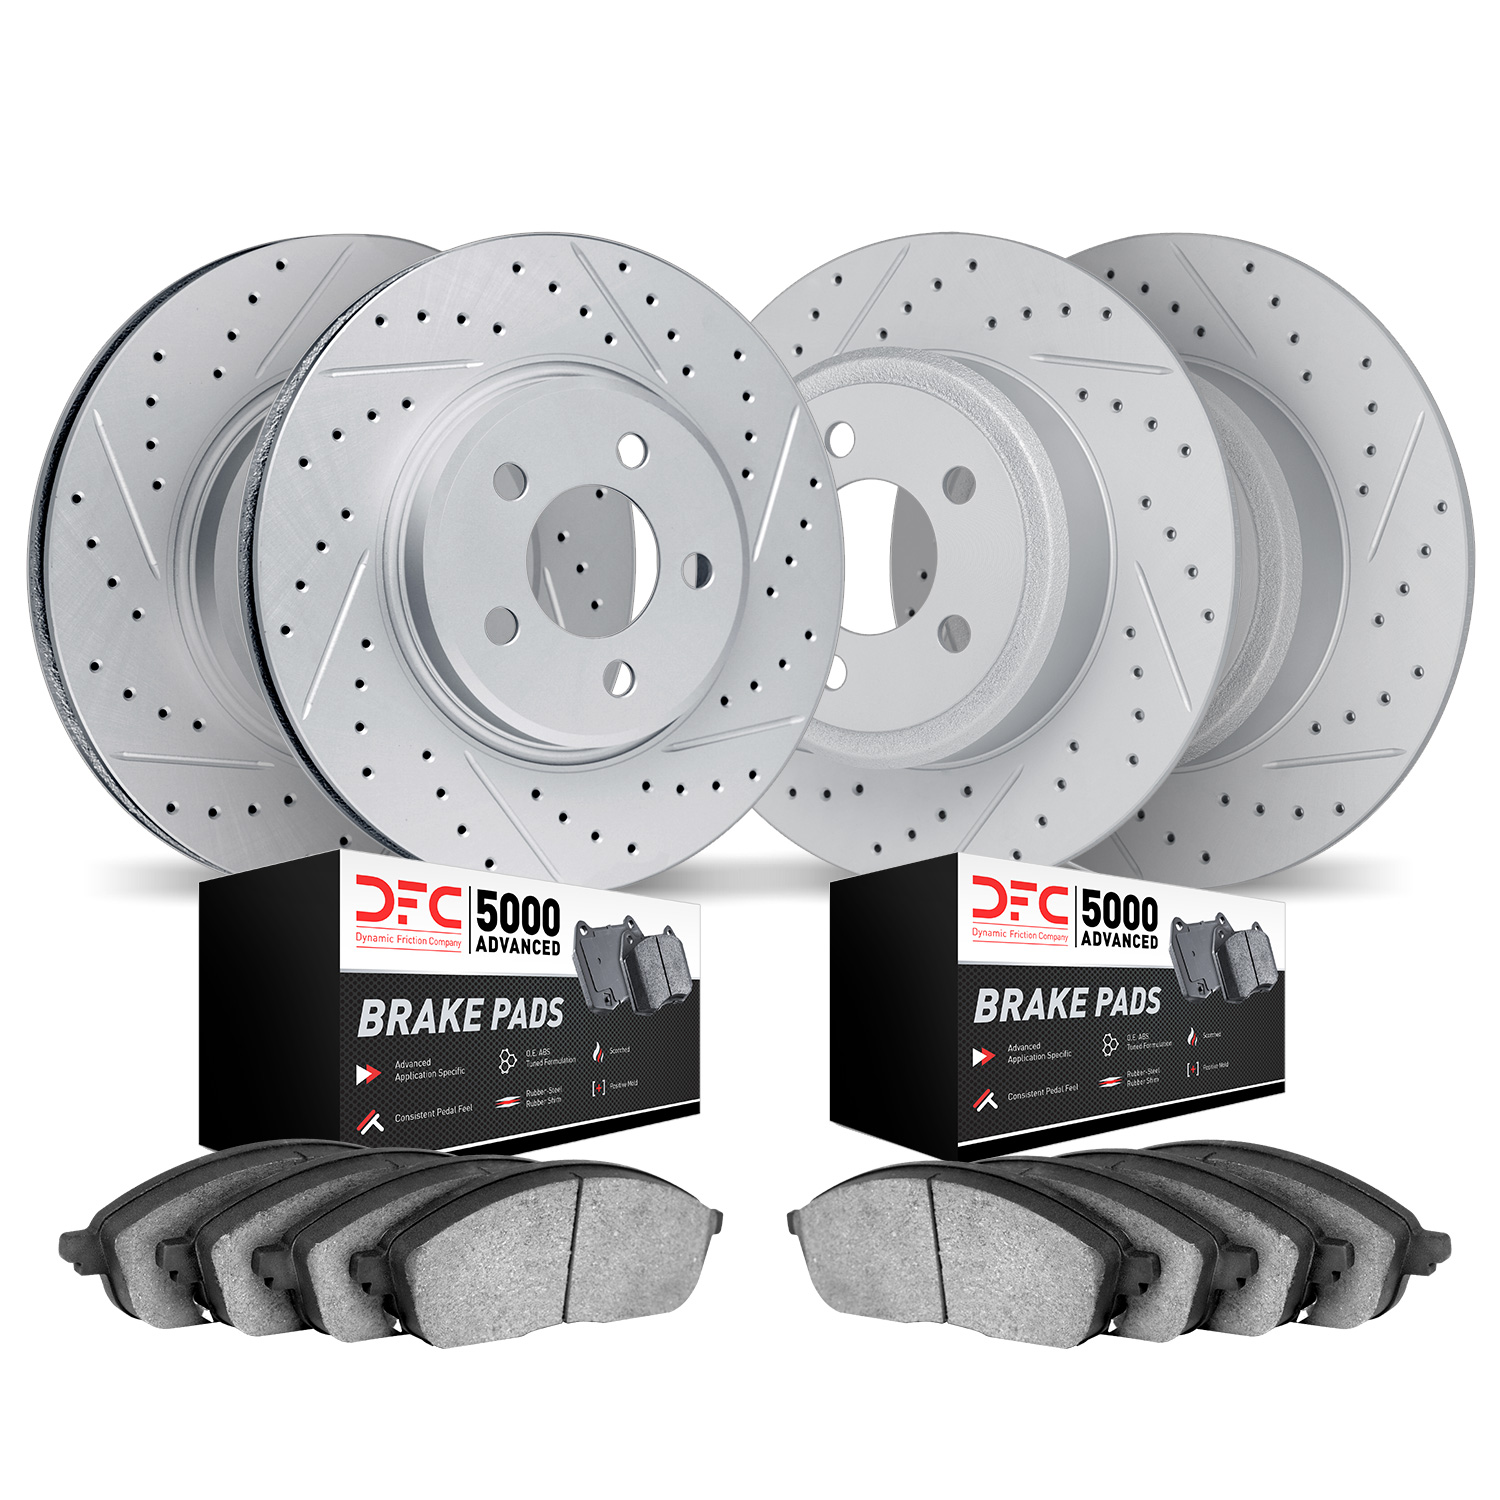 2504-46033 Geoperformance Drilled/Slotted Rotors w/5000 Advanced Brake Pads Kit, 2014-2019 GM, Position: Front and Rear